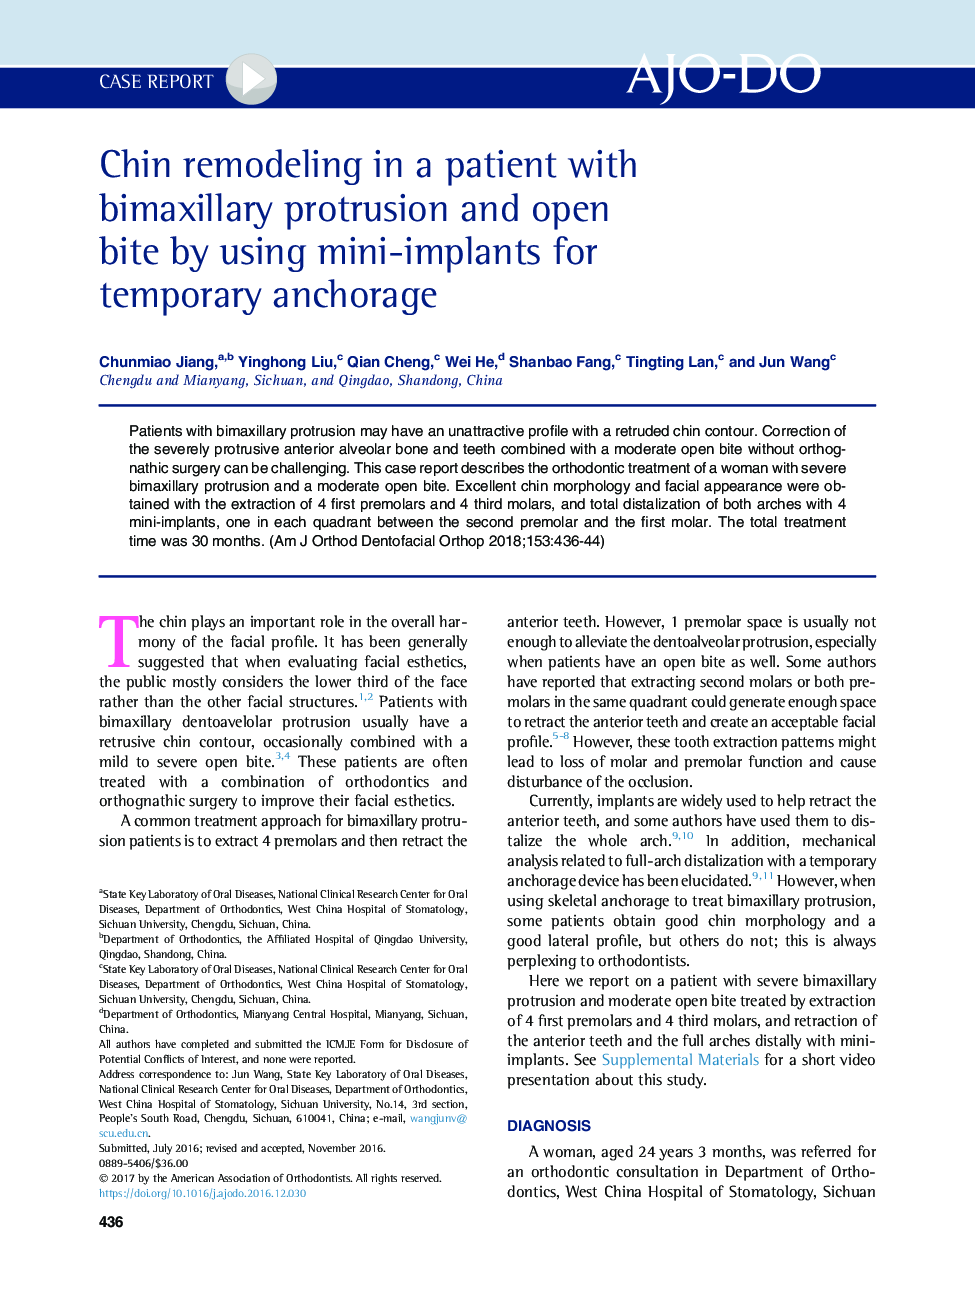 Chin remodeling in a patient with bimaxillary protrusion and open bite by using mini-implants for temporary anchorage